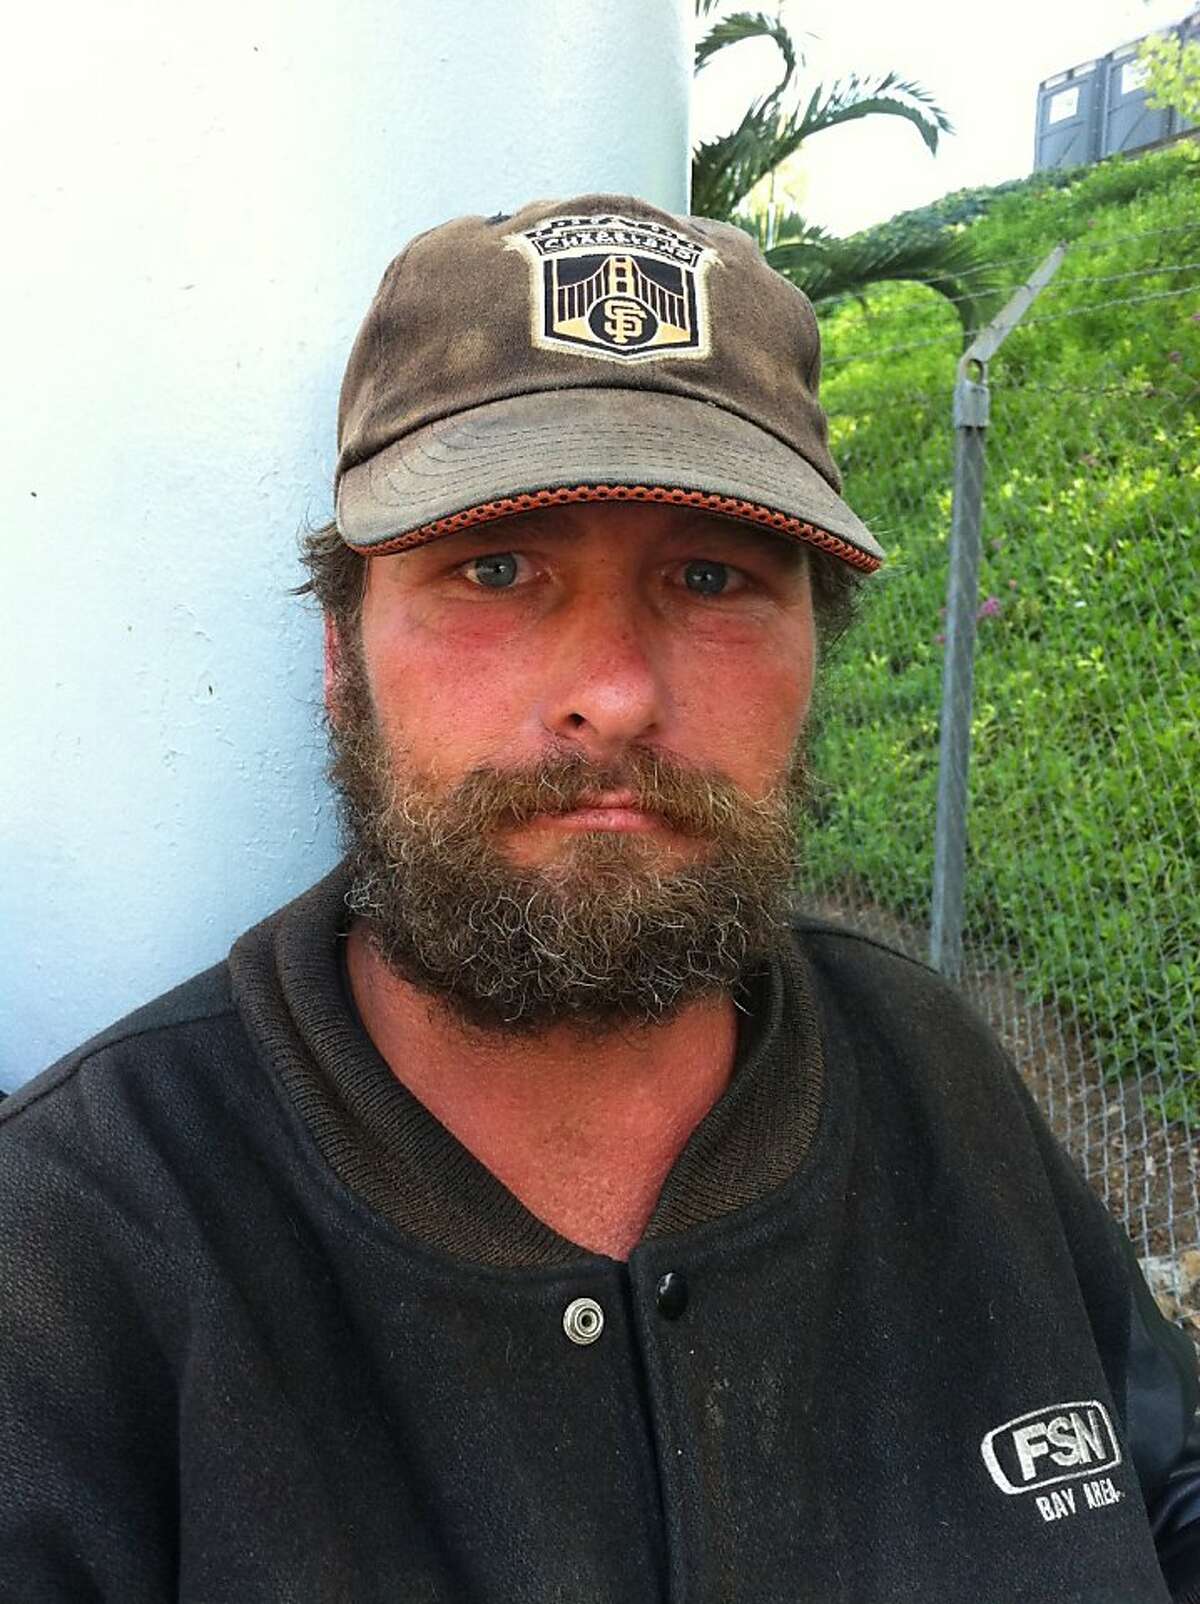 Billy Chamberlain, a homeless Giants fan whose apparent disappearance drew the concern of the team, shows up outside Dodger Stadium on Sept. 20, 2011.